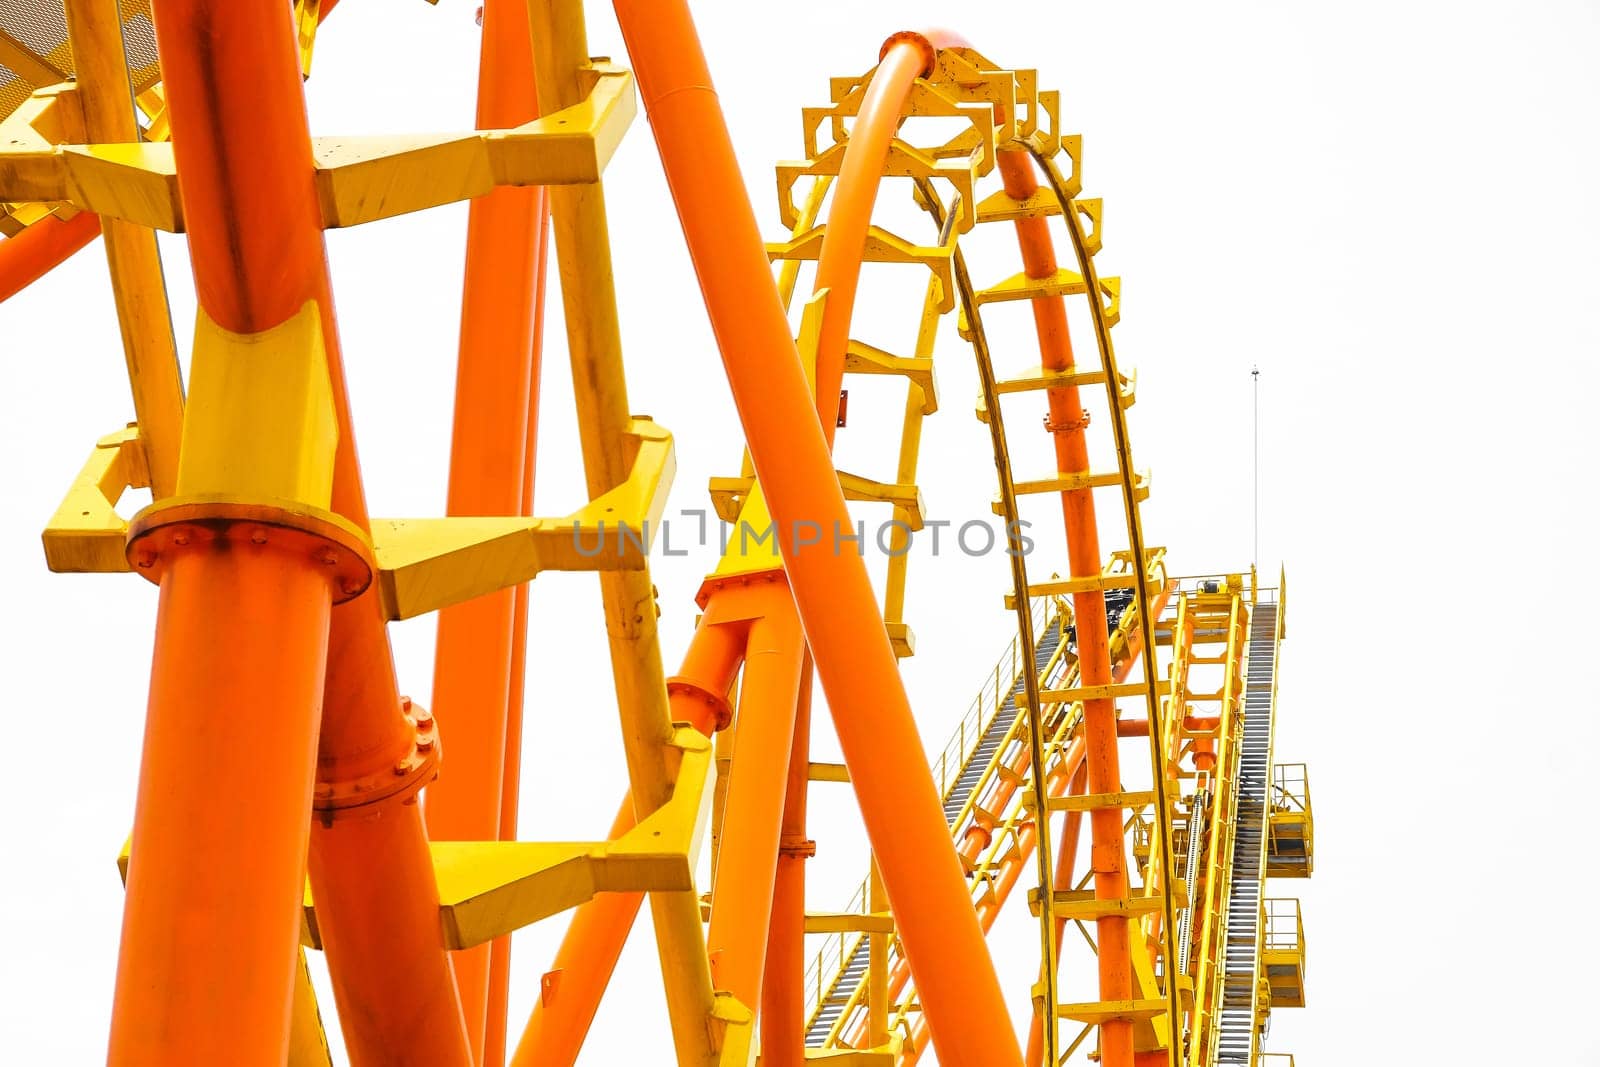 Rollercoaster on white background, closeup of photo.